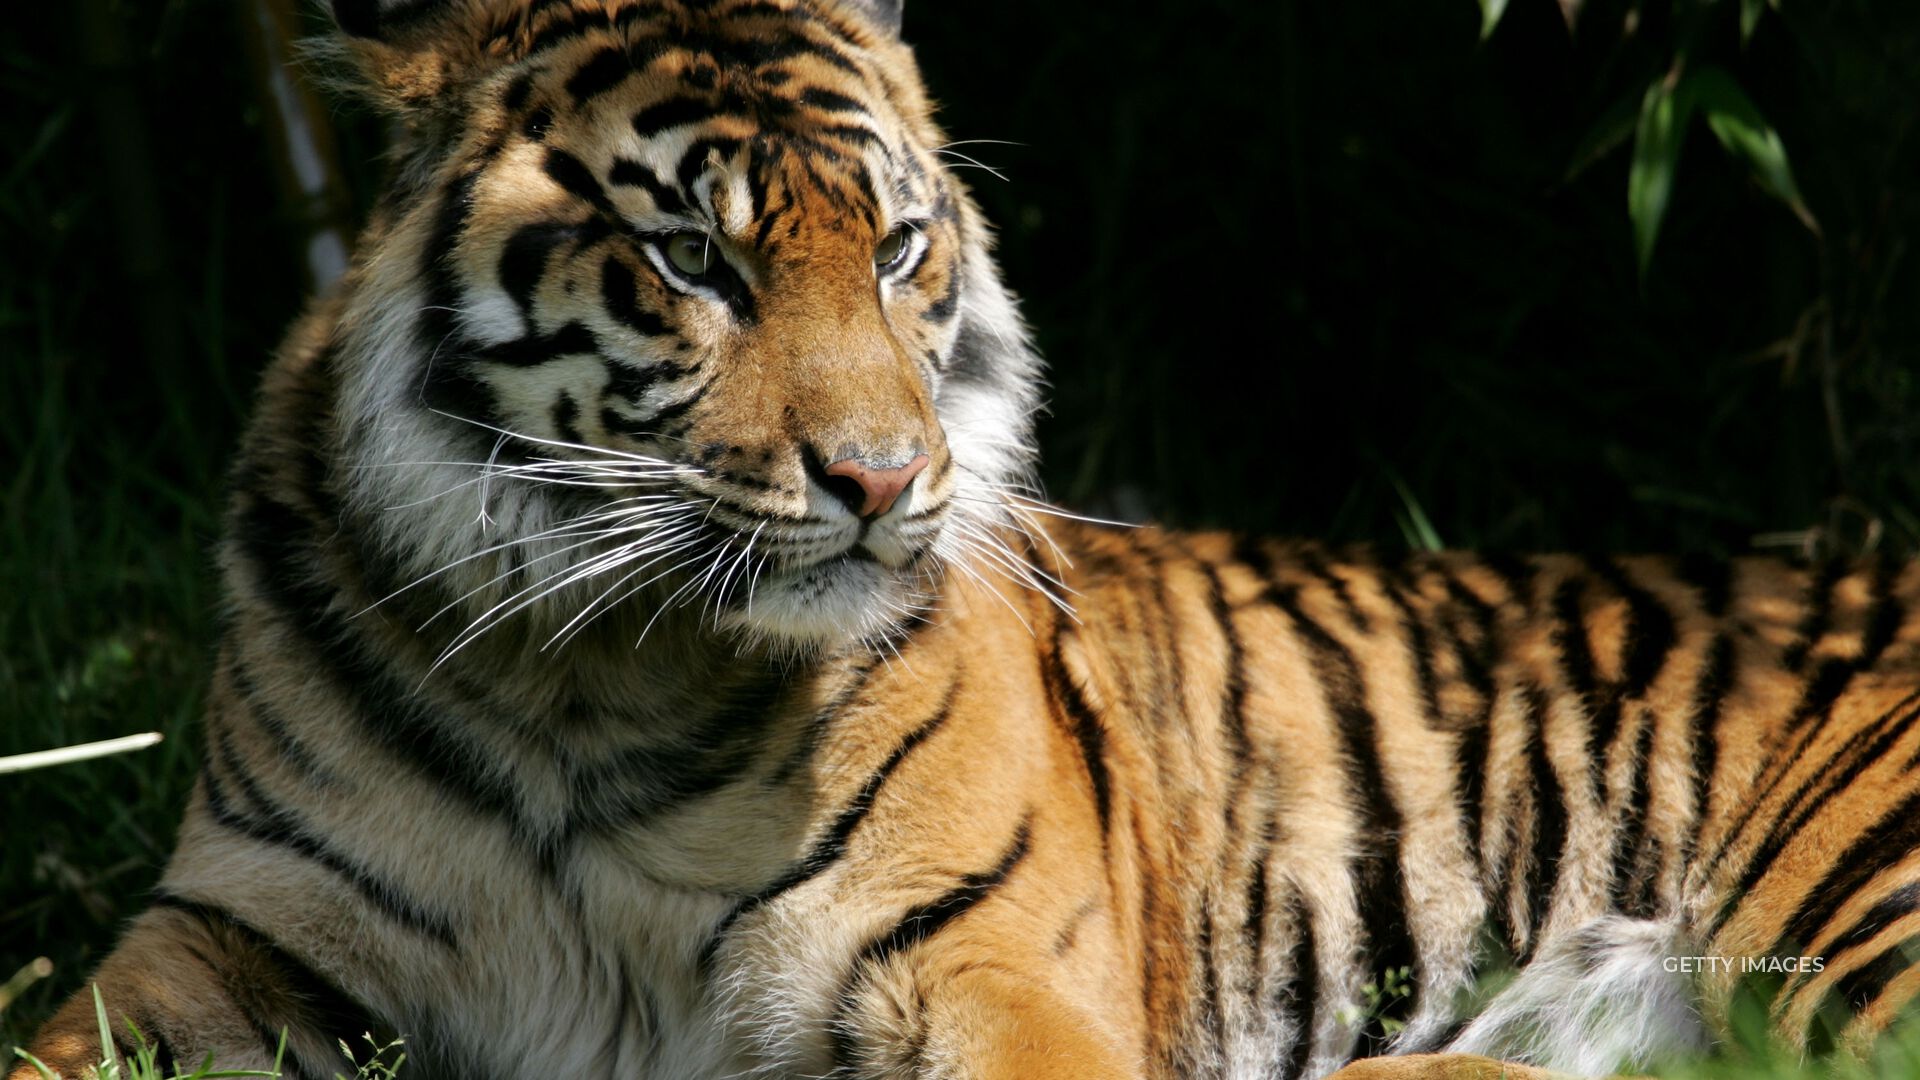 A conservation union released a promising report on the endangered tiger population.